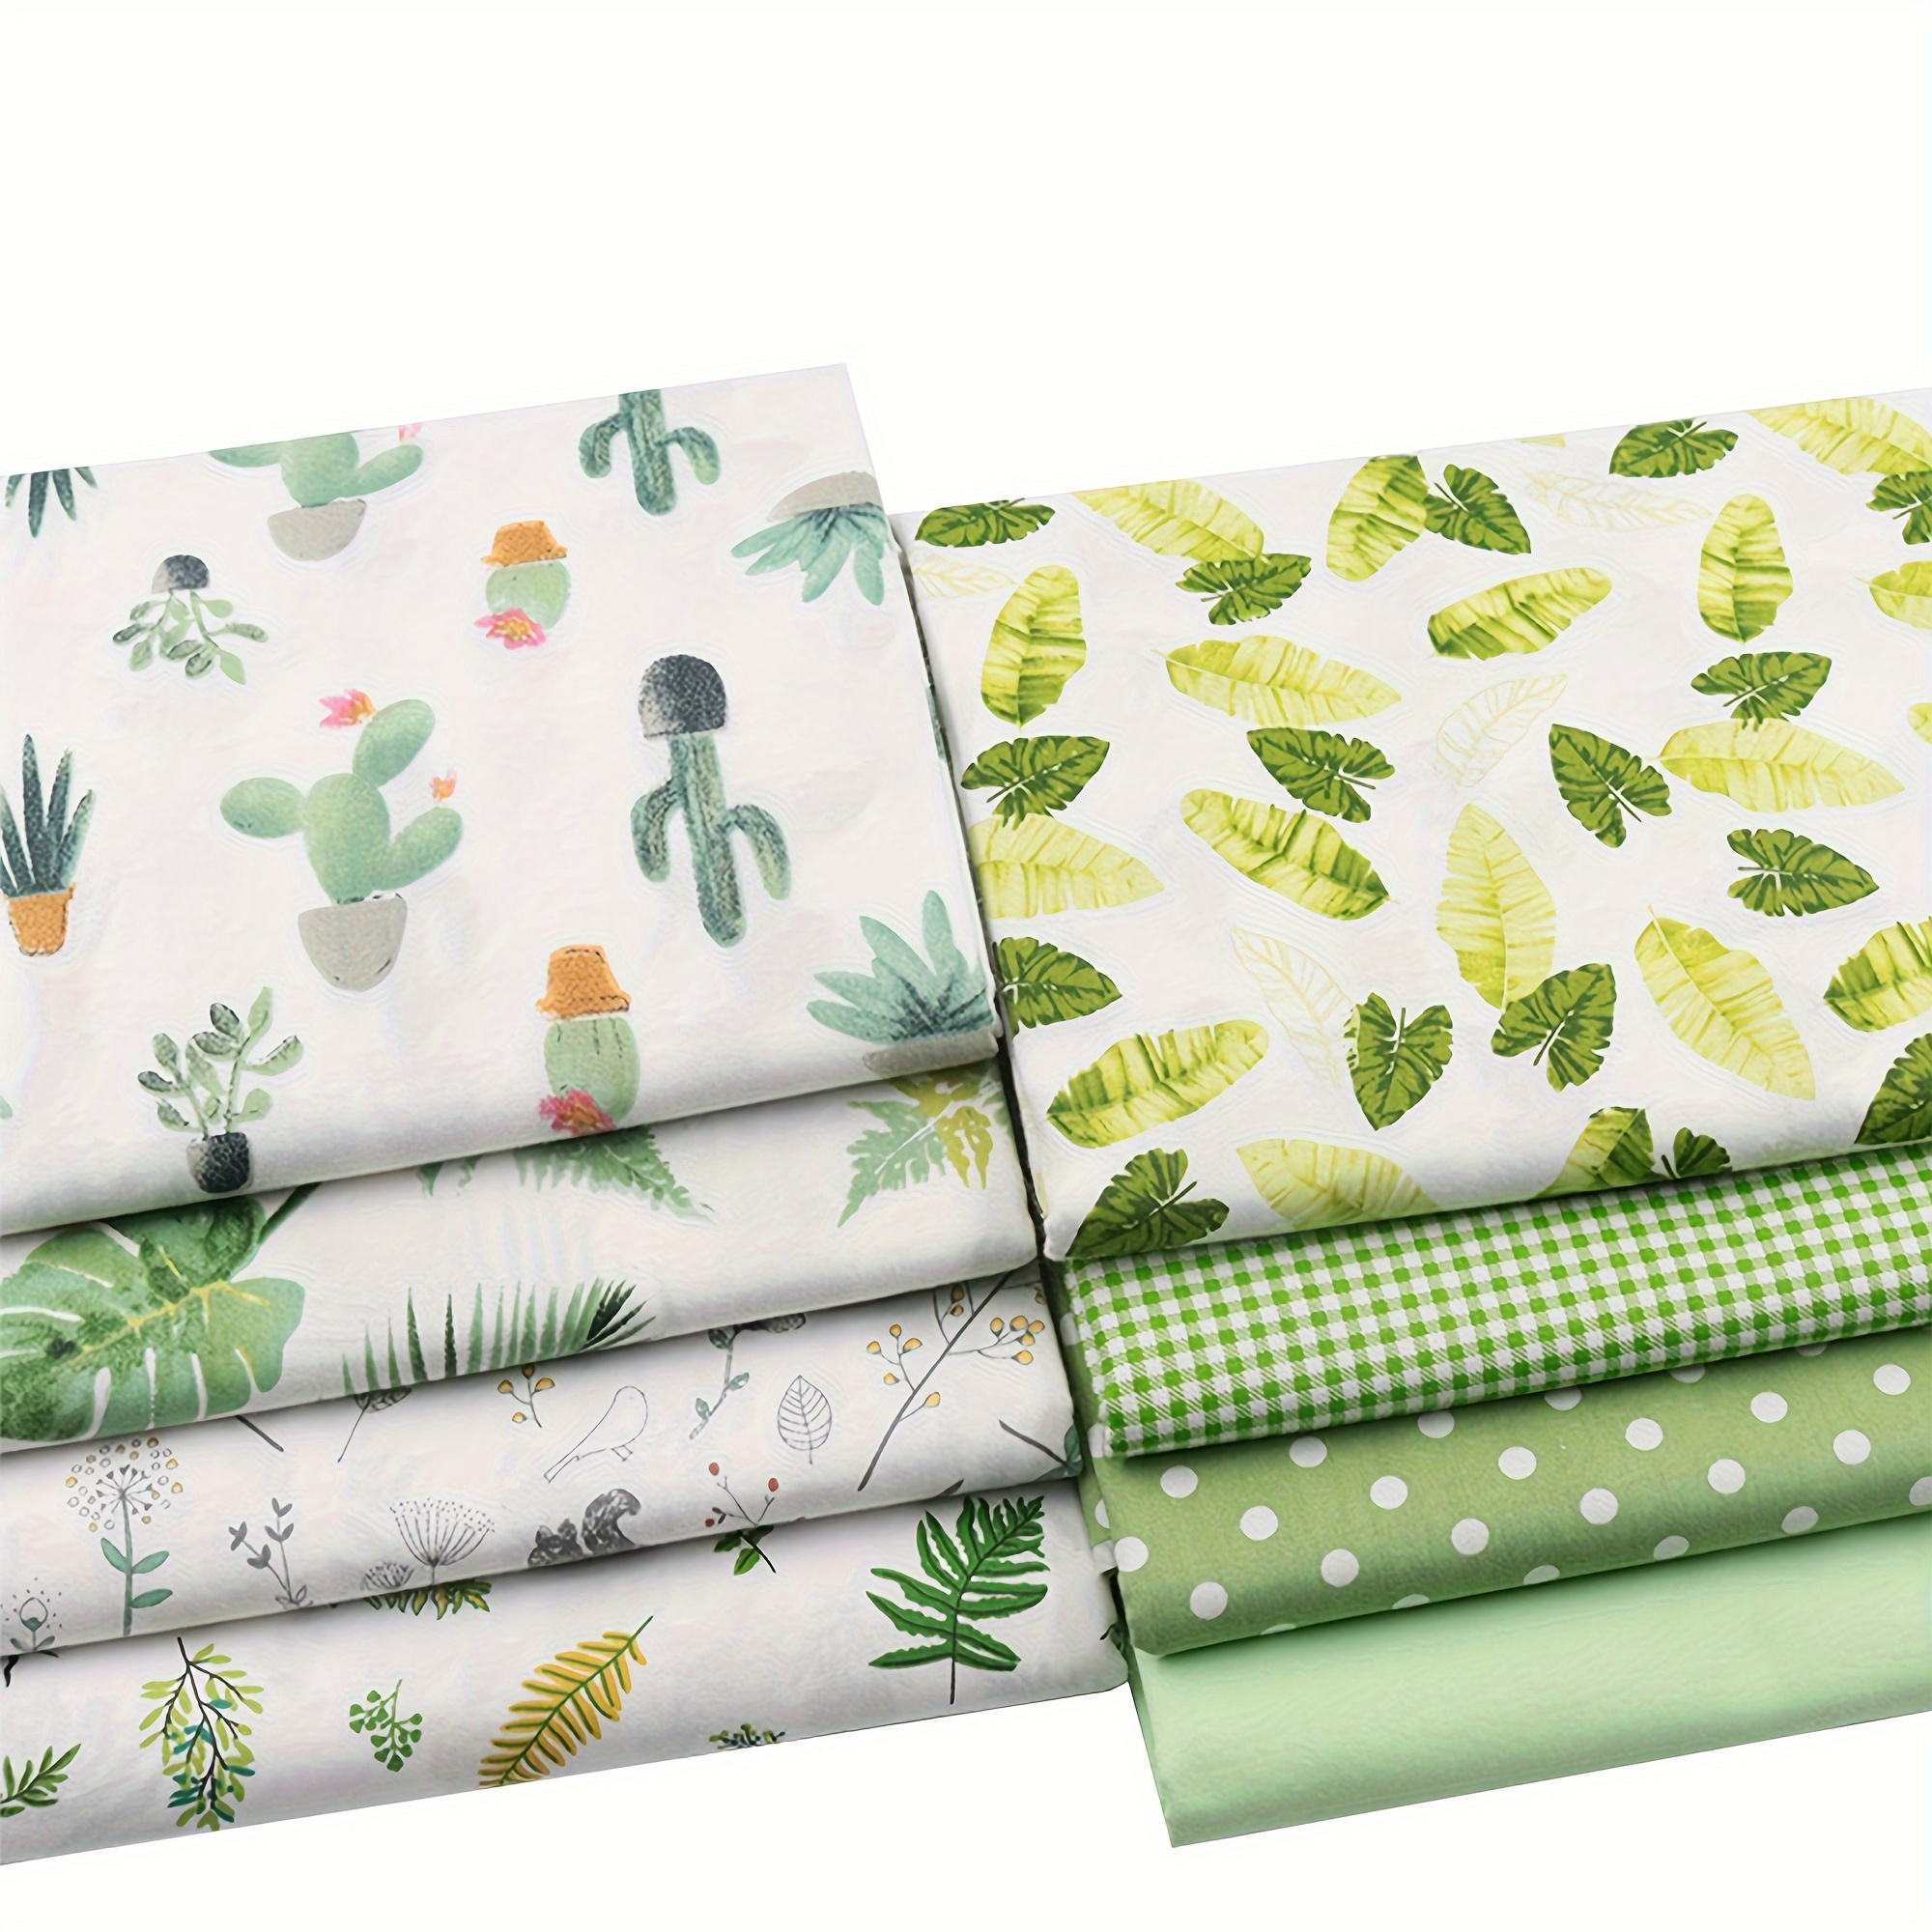 

8-piece Green Floral Cotton Fabric Bundle, 18" X 22" Fat Quarters - Perfect For Diy Sewing & Crafts